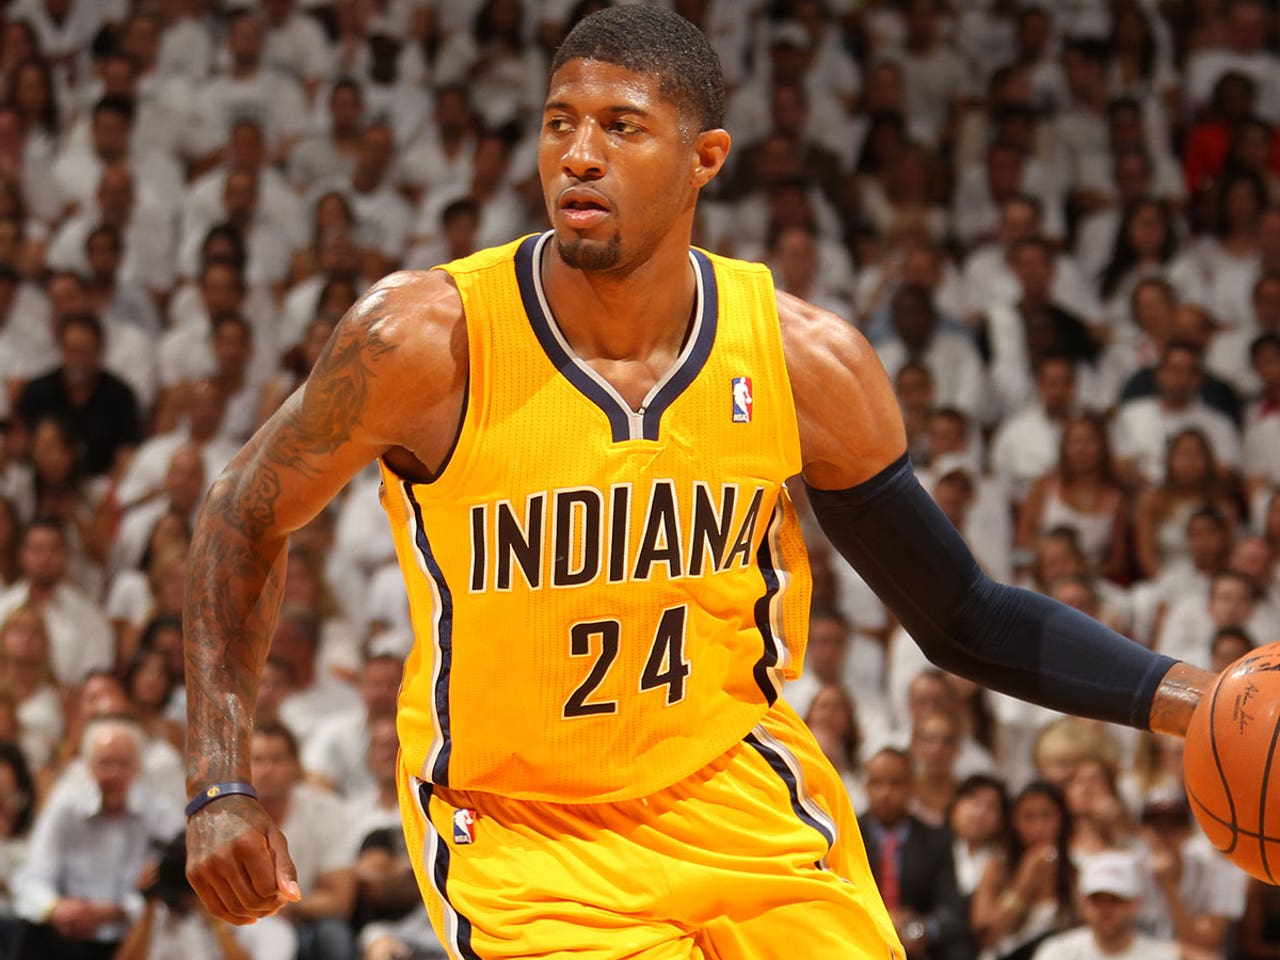 Paul George changes jersey number from 24 to 13, will be known as PG-13